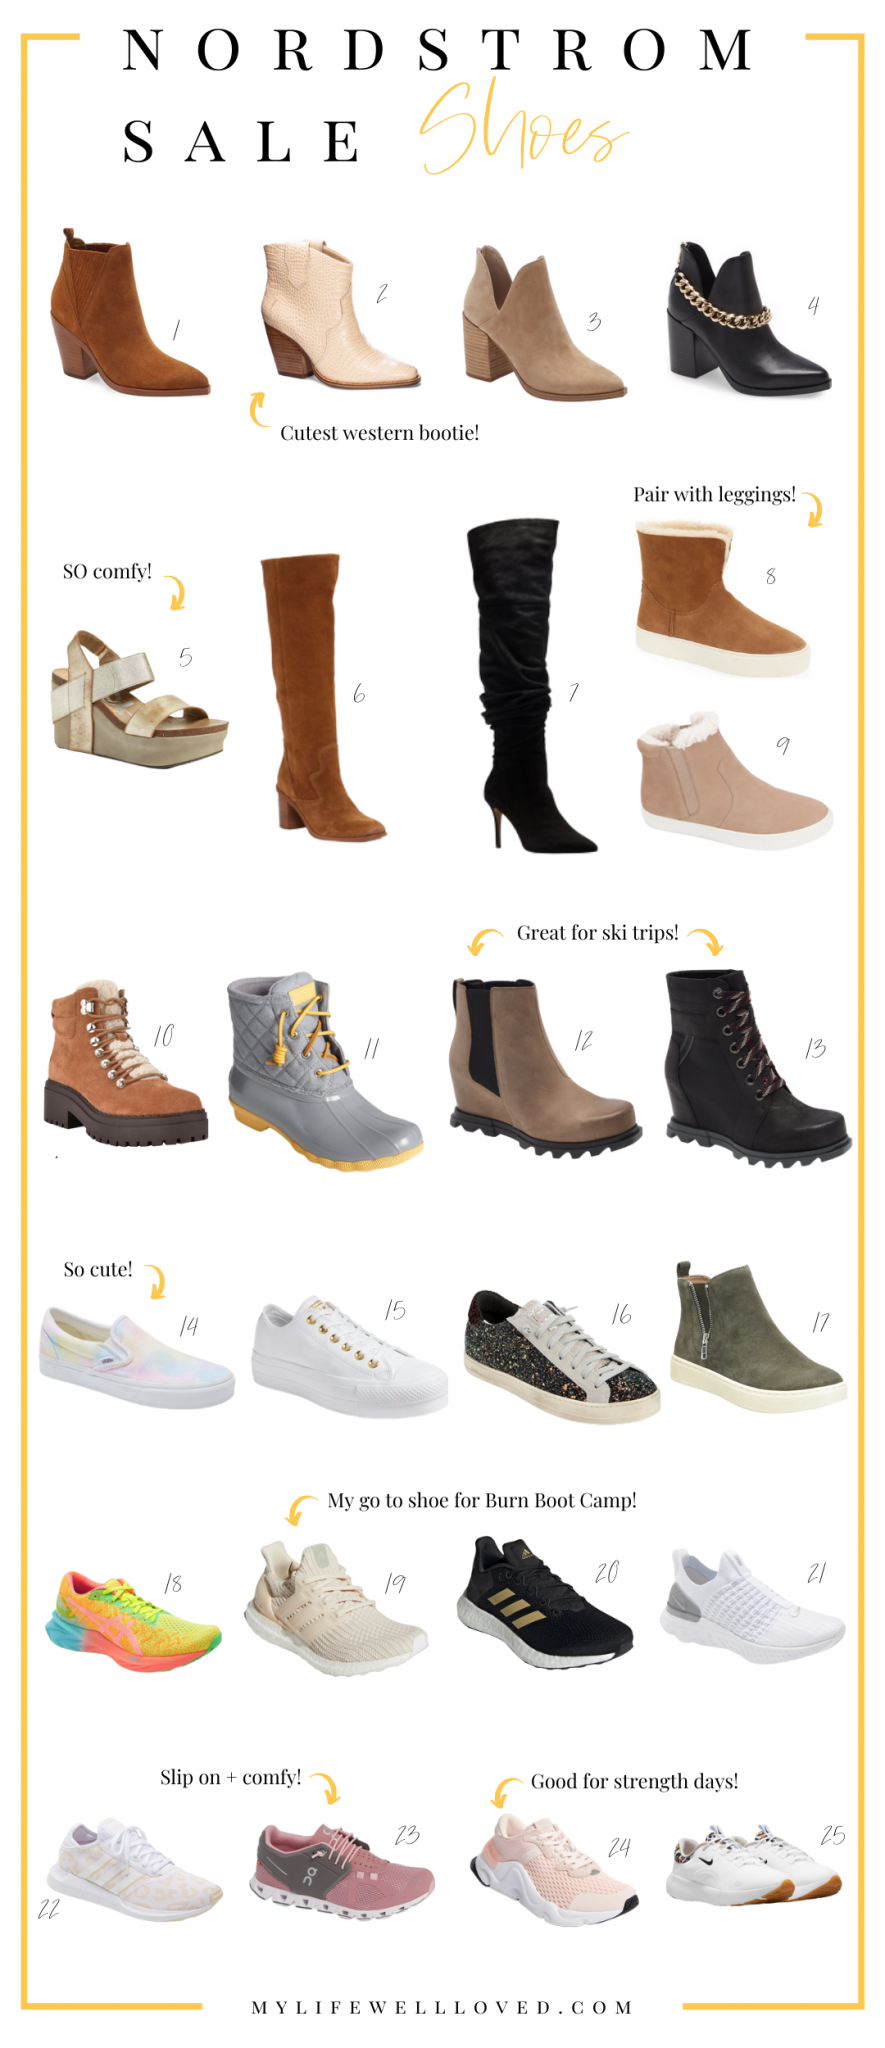 Nordstrom Anniversary Sale: Top 10 Shoes